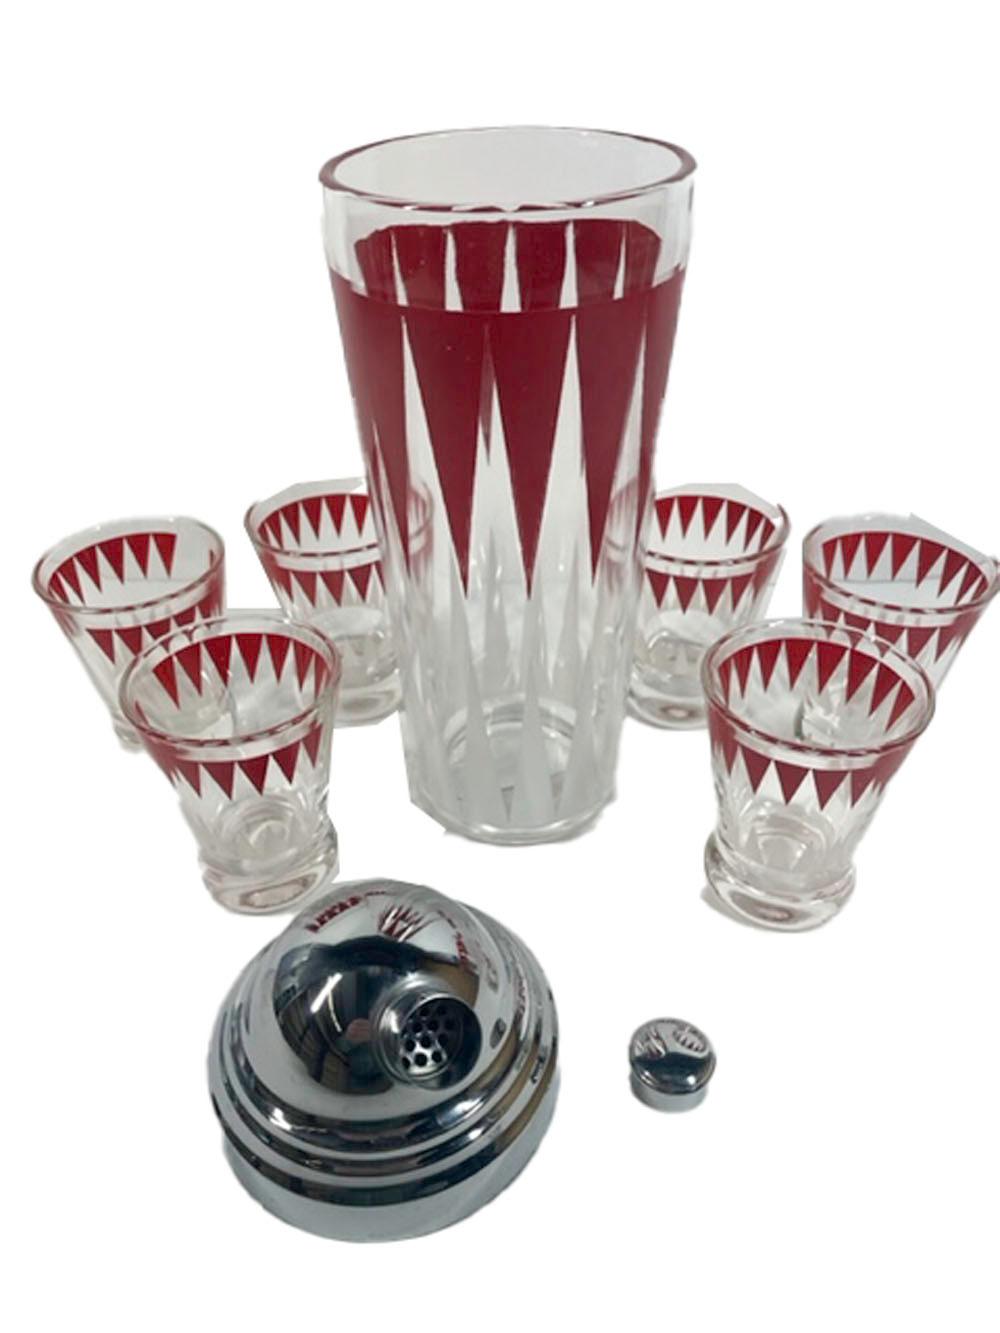 Vintage cocktail shaker and 6 footed glasses decorated with white elongated arrows pointing up from the base and red arrows pointed down from the top, the shaker with a chromed lid.